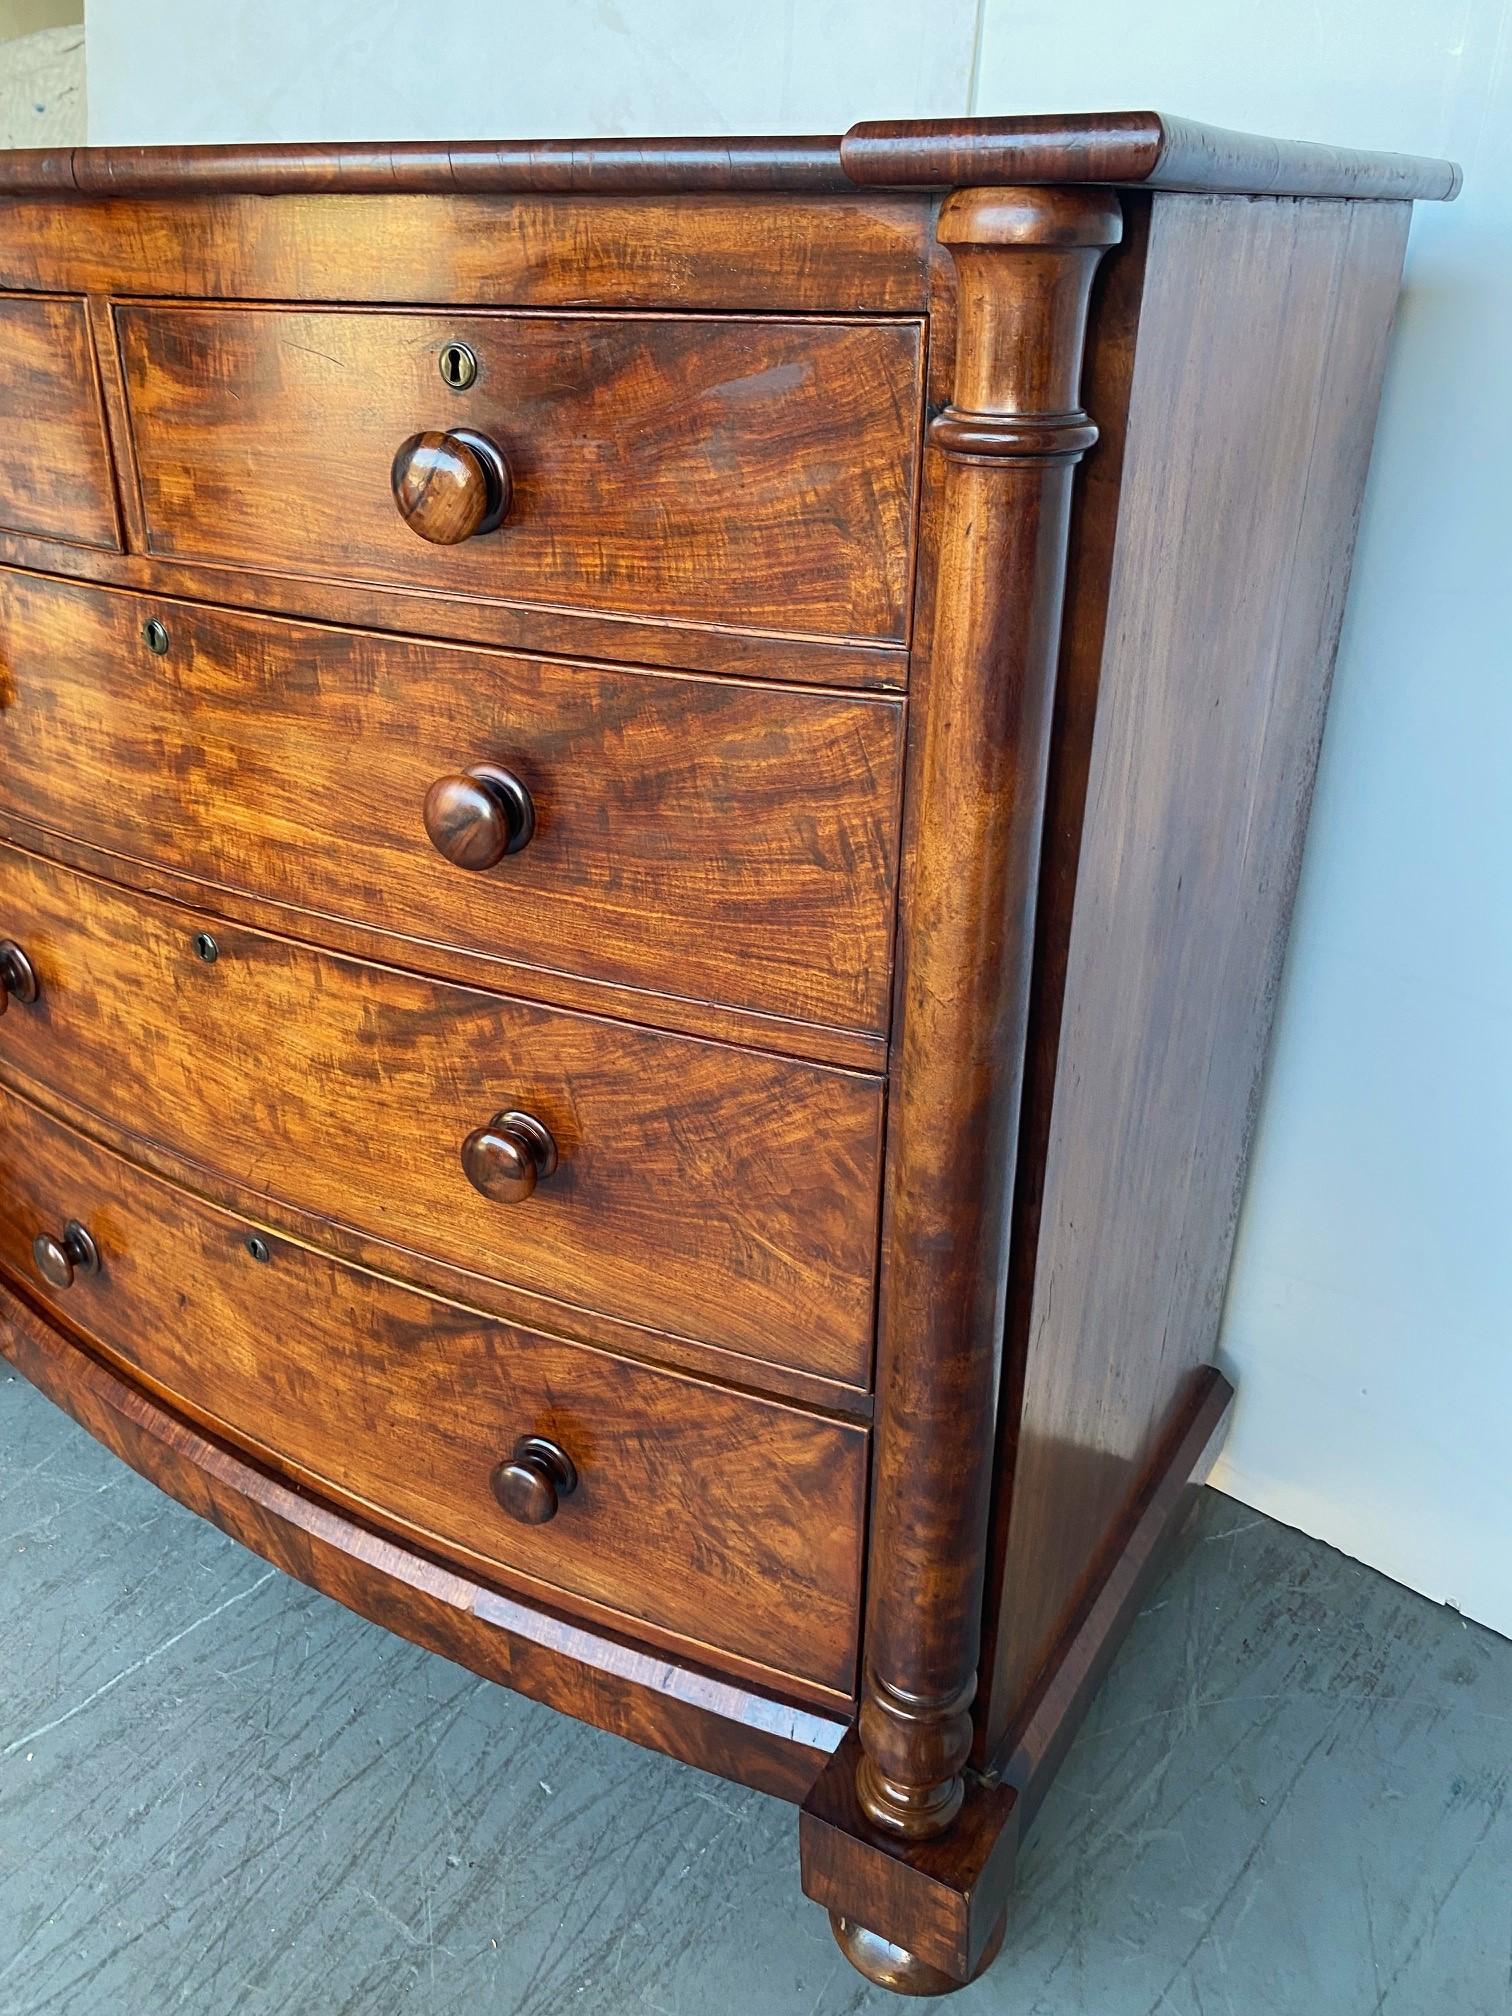  An English Mahogany Dresser / Chest of drawers. Superb crotch mahogany graining to the drawers and bottom plinth. All original wooden knobs, brass lock escutcheons, and brass casters. c.1840
